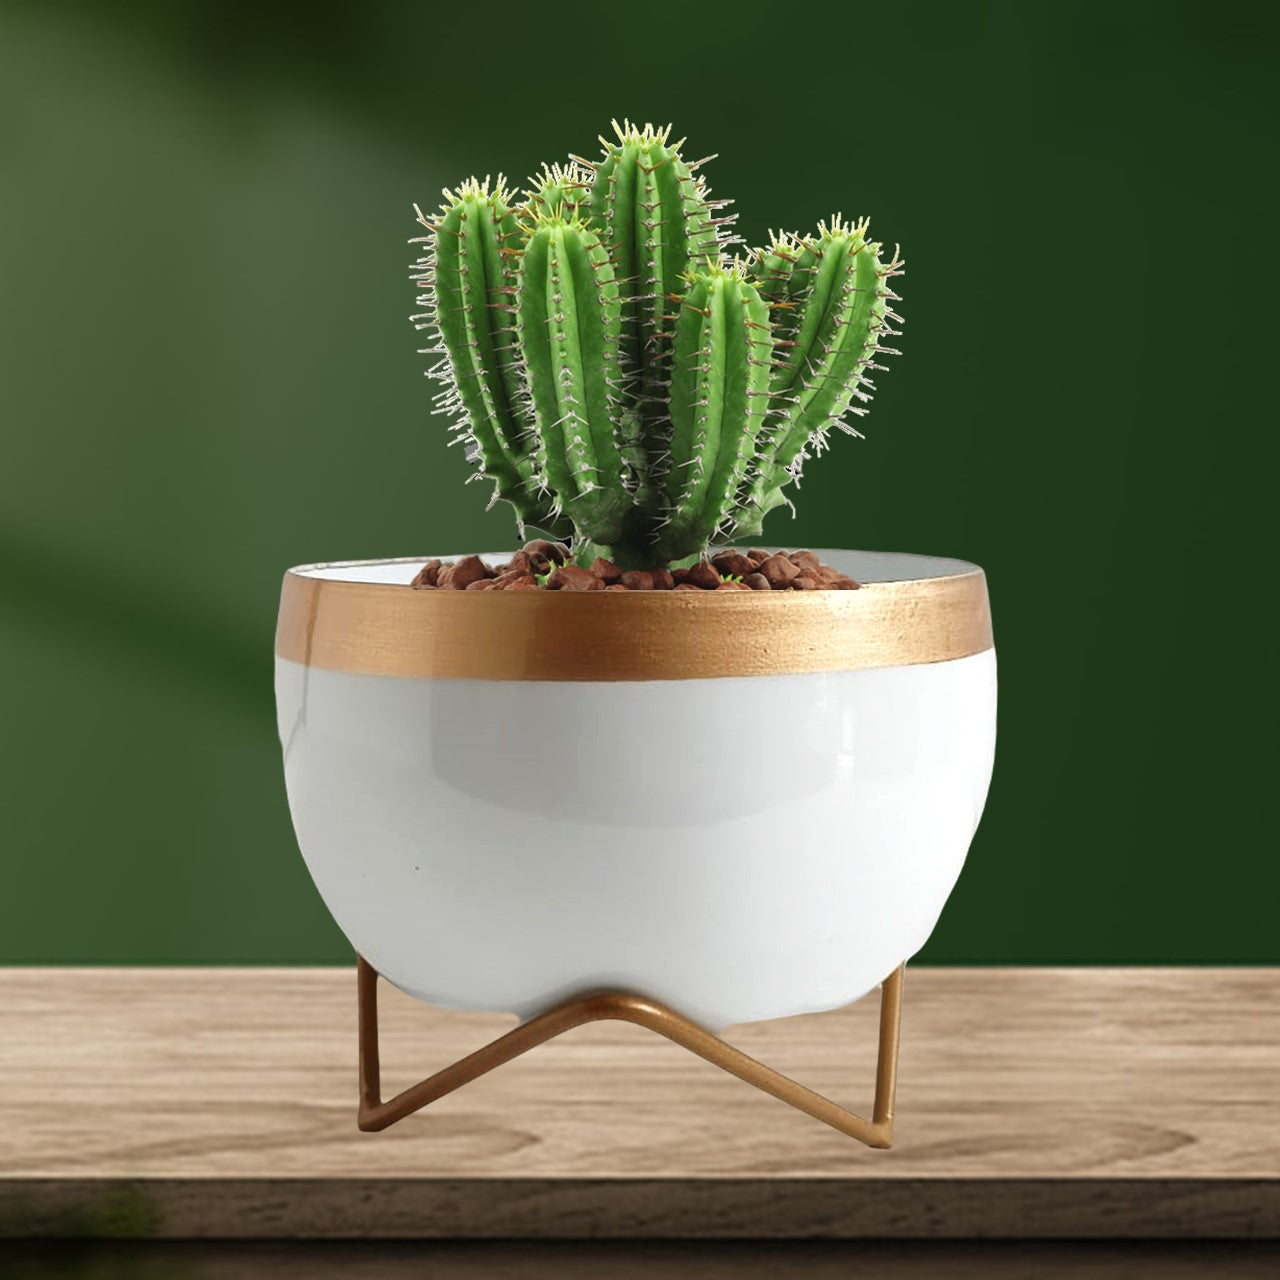 ecofynd 5 inches Elis White Metal Planter Pot with Gold Stand Planter freeshipping - Ecofynd